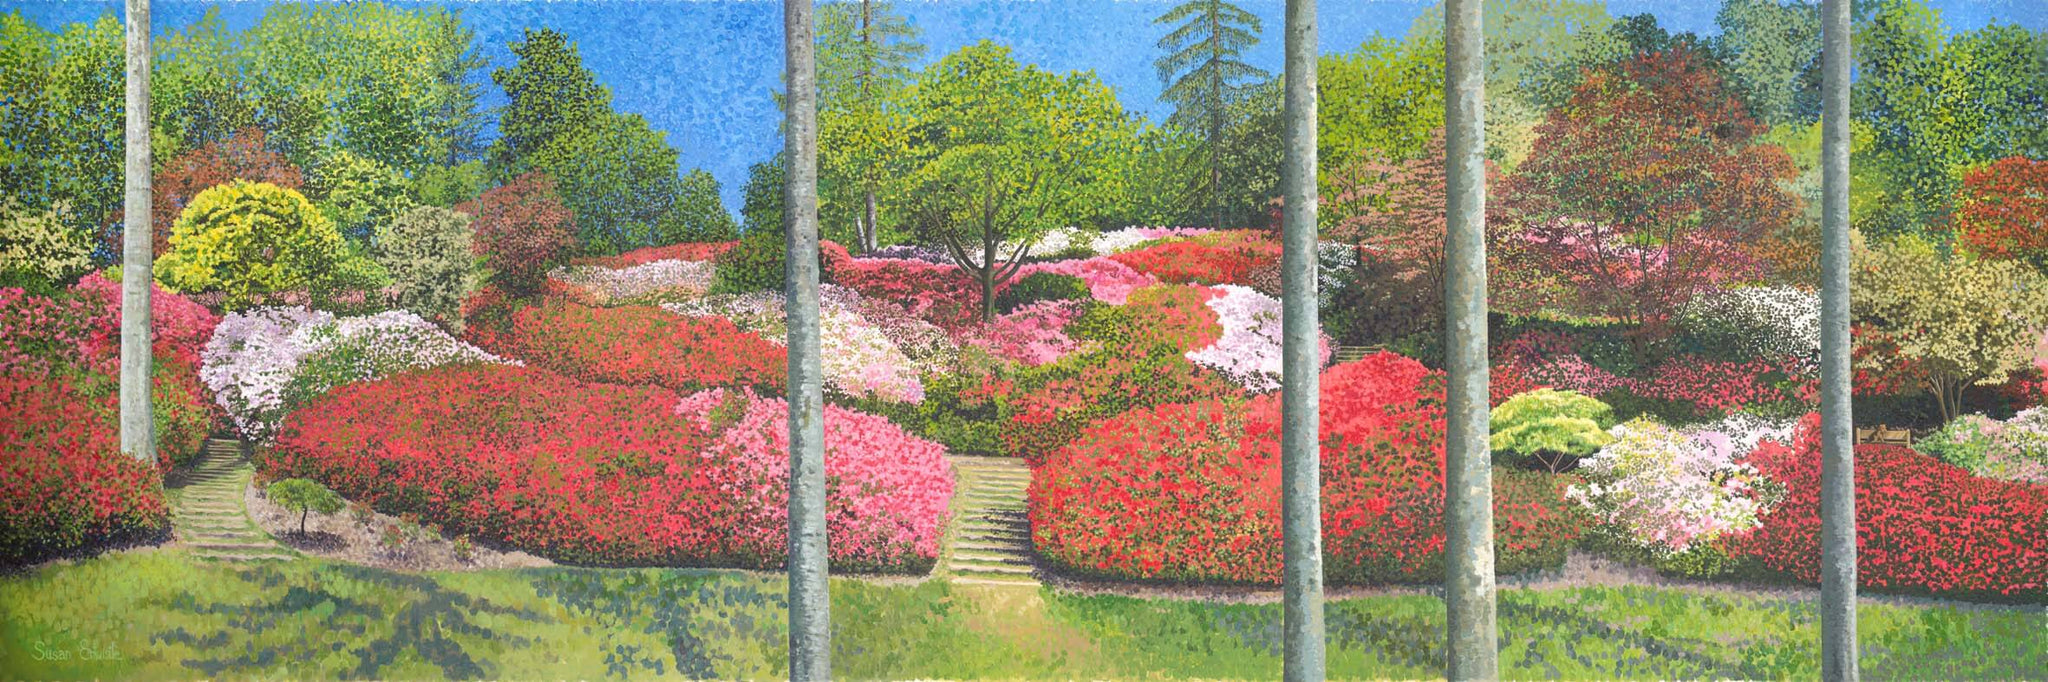 The Punch Bowl Valley Gardens - A Painting Commission by Susan Entwistle